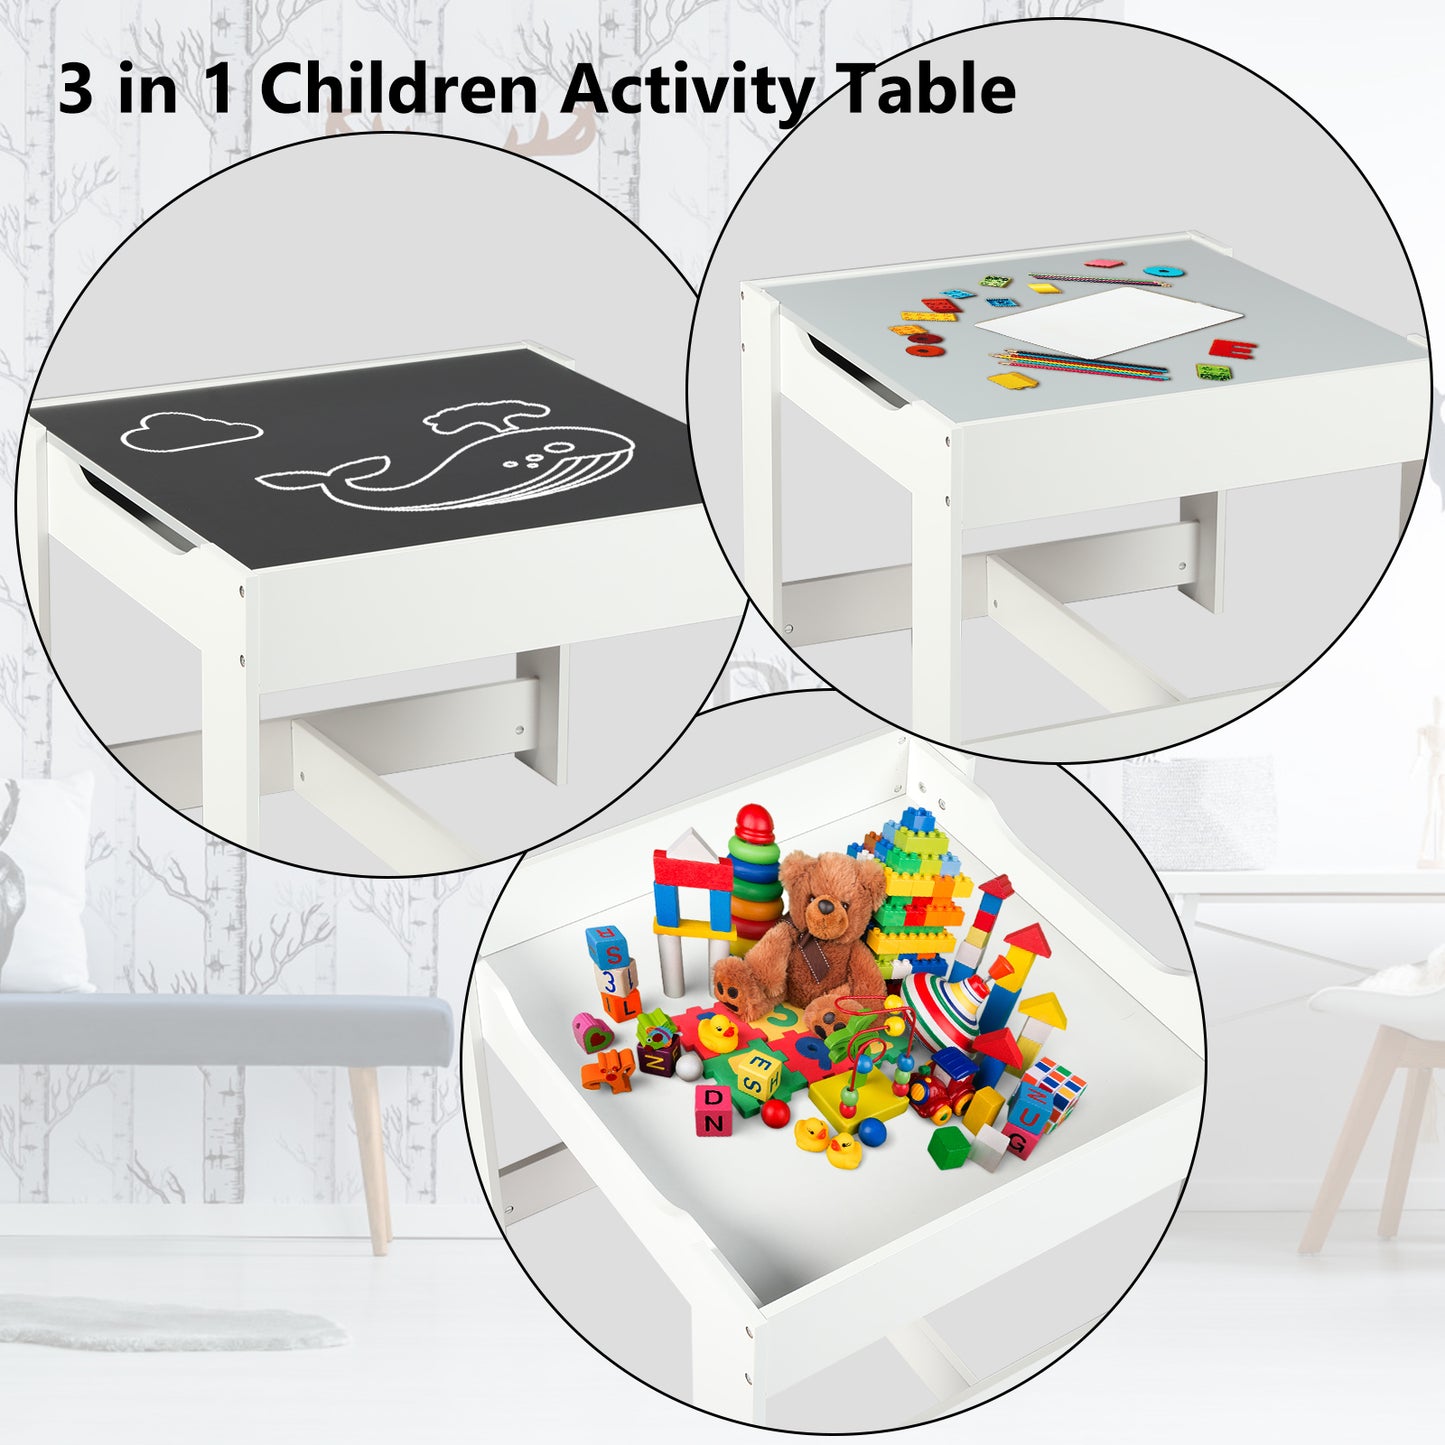 3 in 1 Kids Wood Table & 2 Chairs Set, Children Activity Table w/Storage, Grey